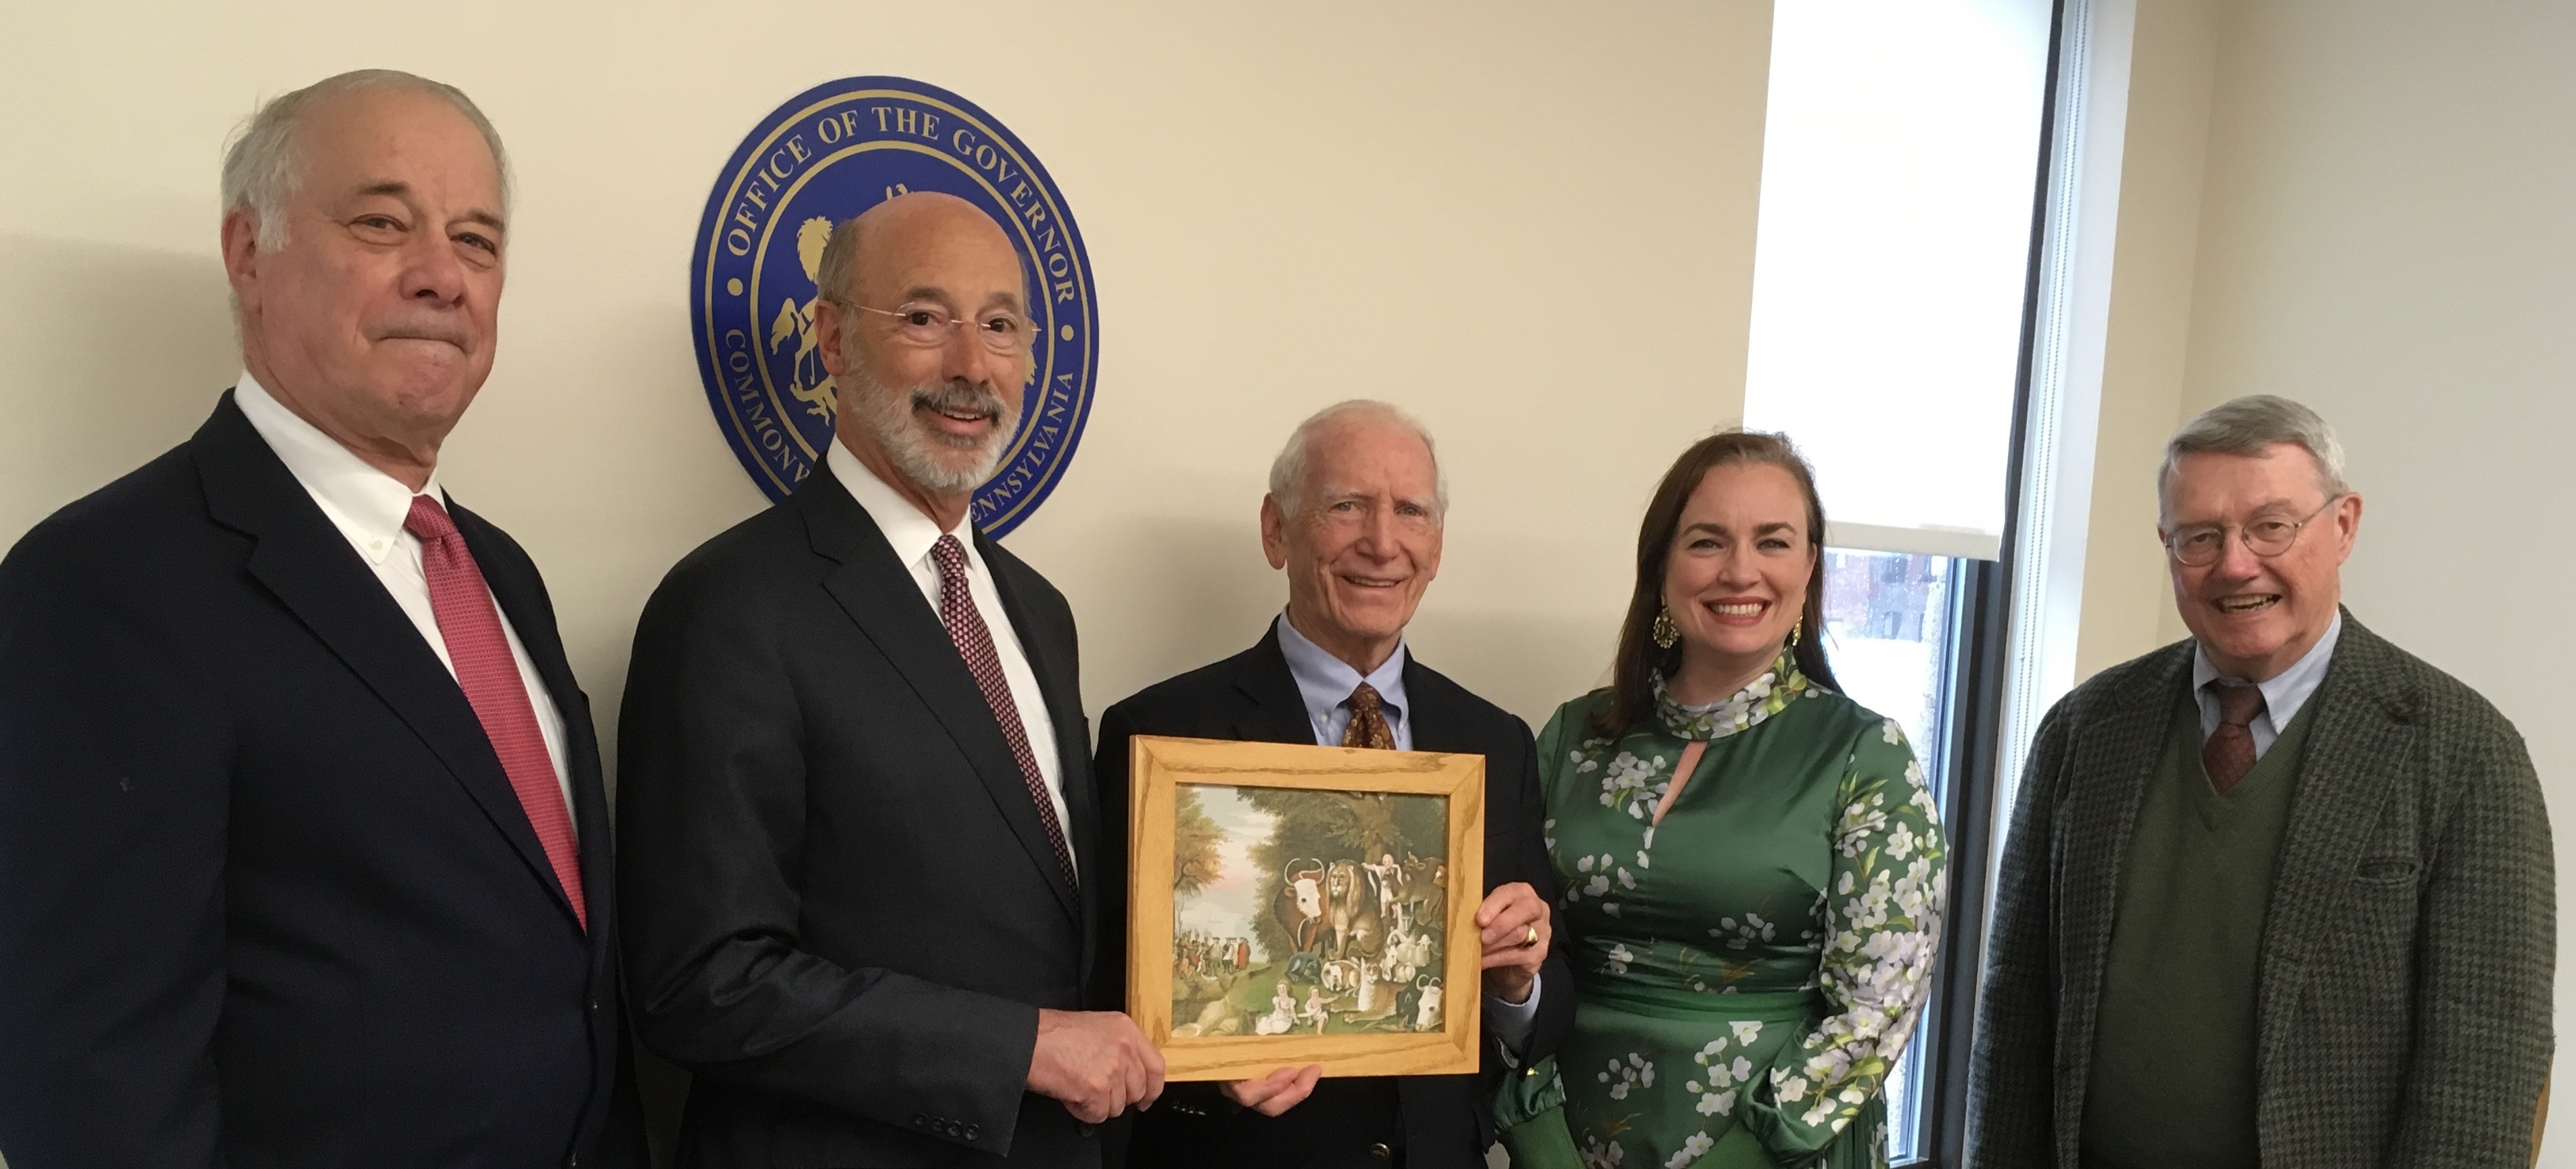 Friends in Business Organizers Present Governor Tom Wolf with Edward Hicks’ Peaceable Kingdom